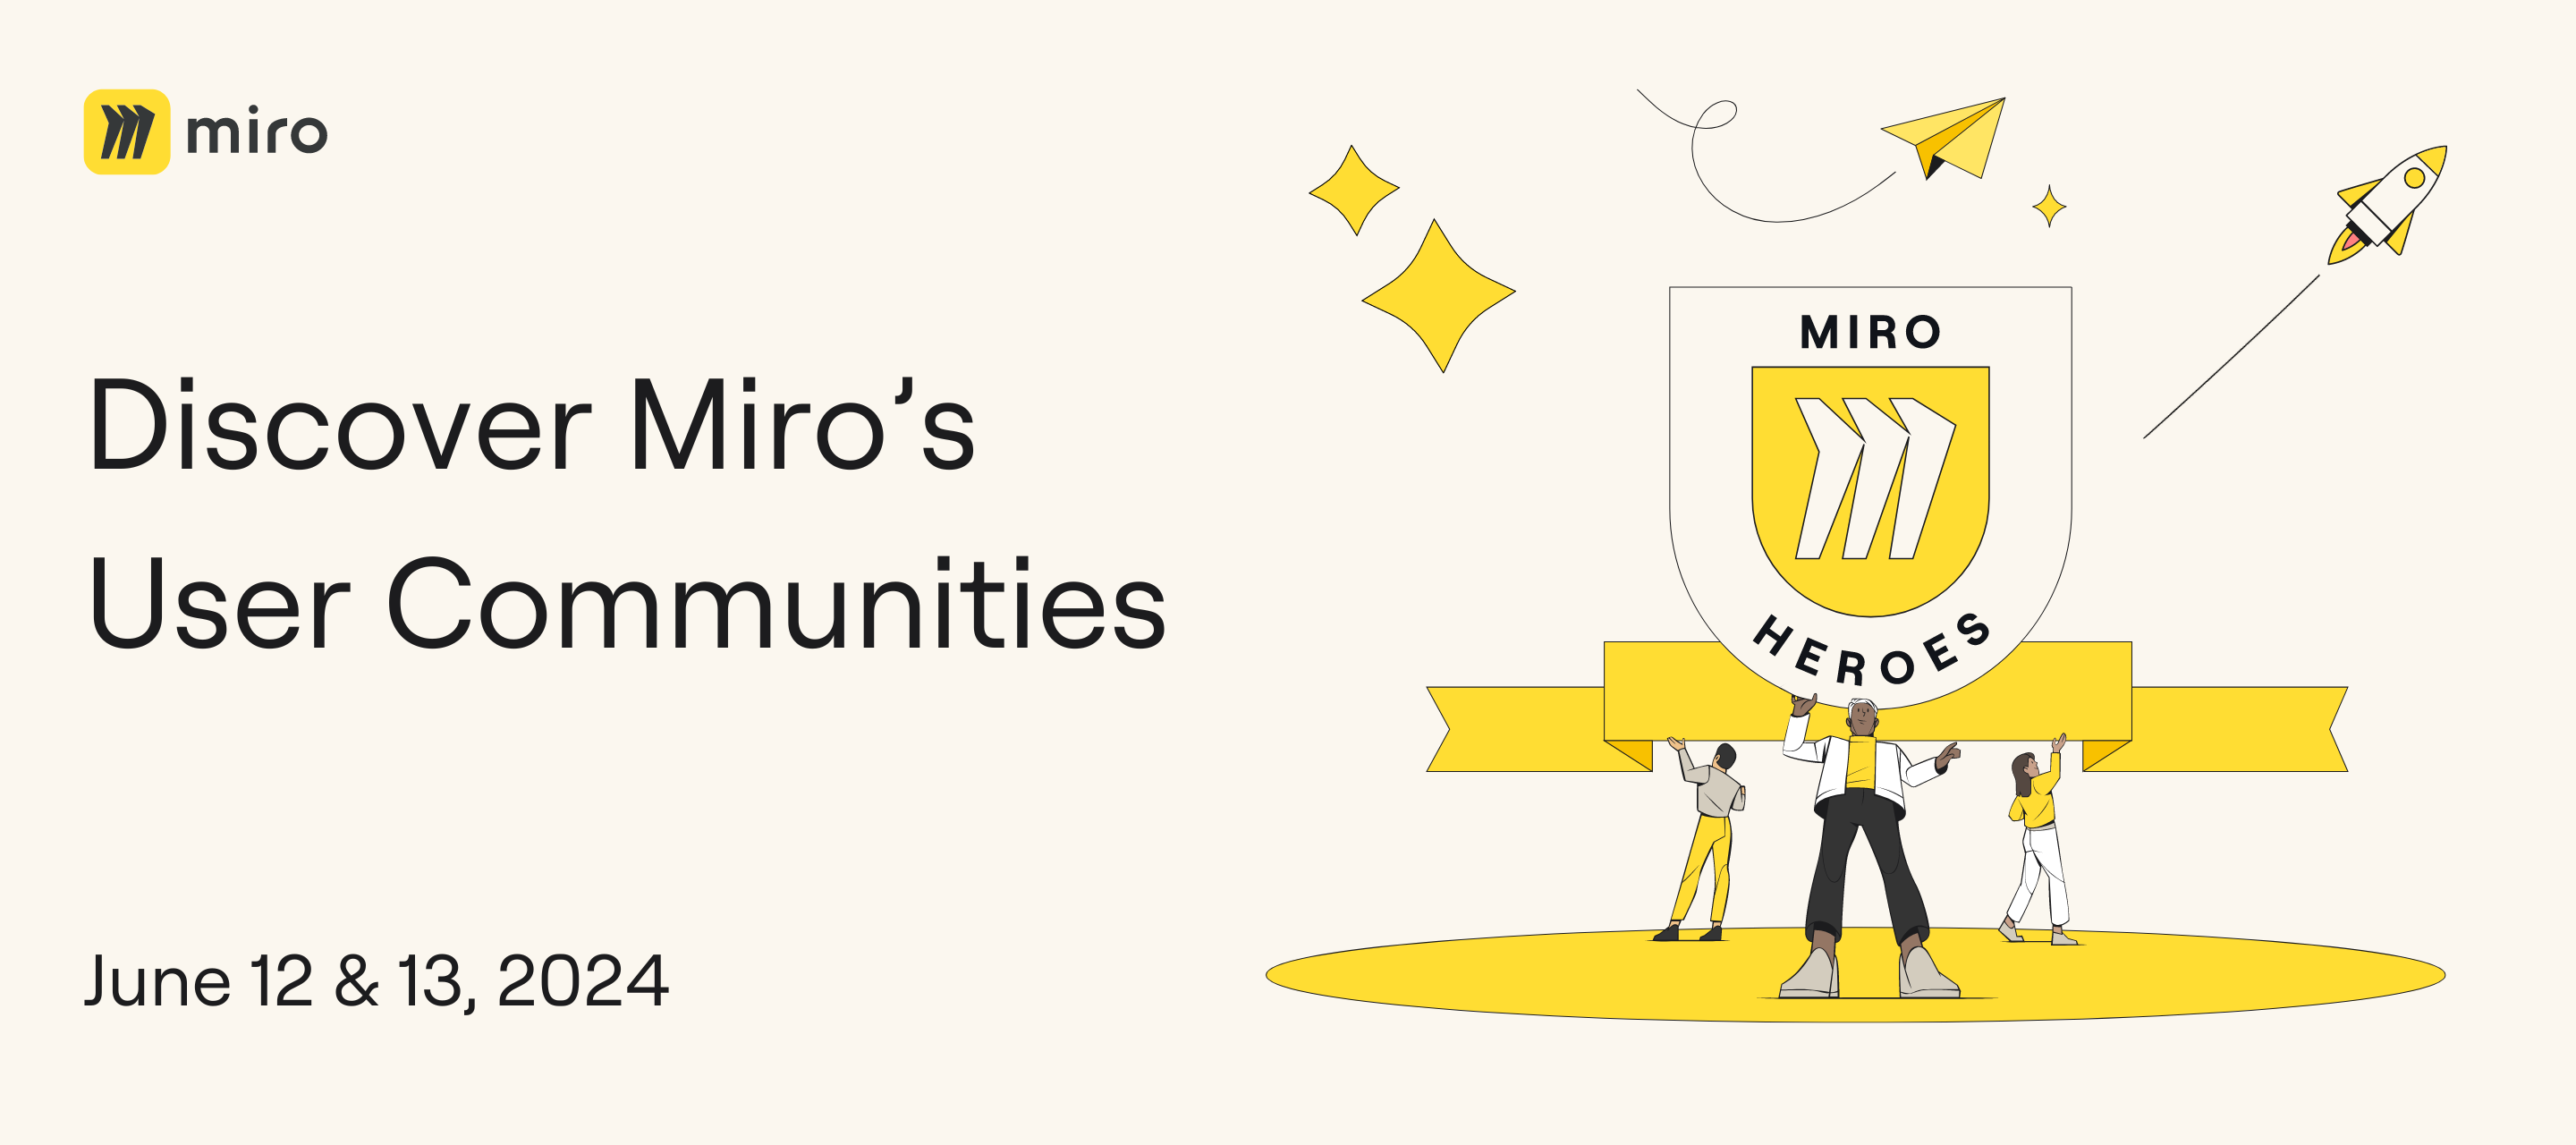 Virtual Event: Discover which Miro super user community is right for you on June 12 & 13